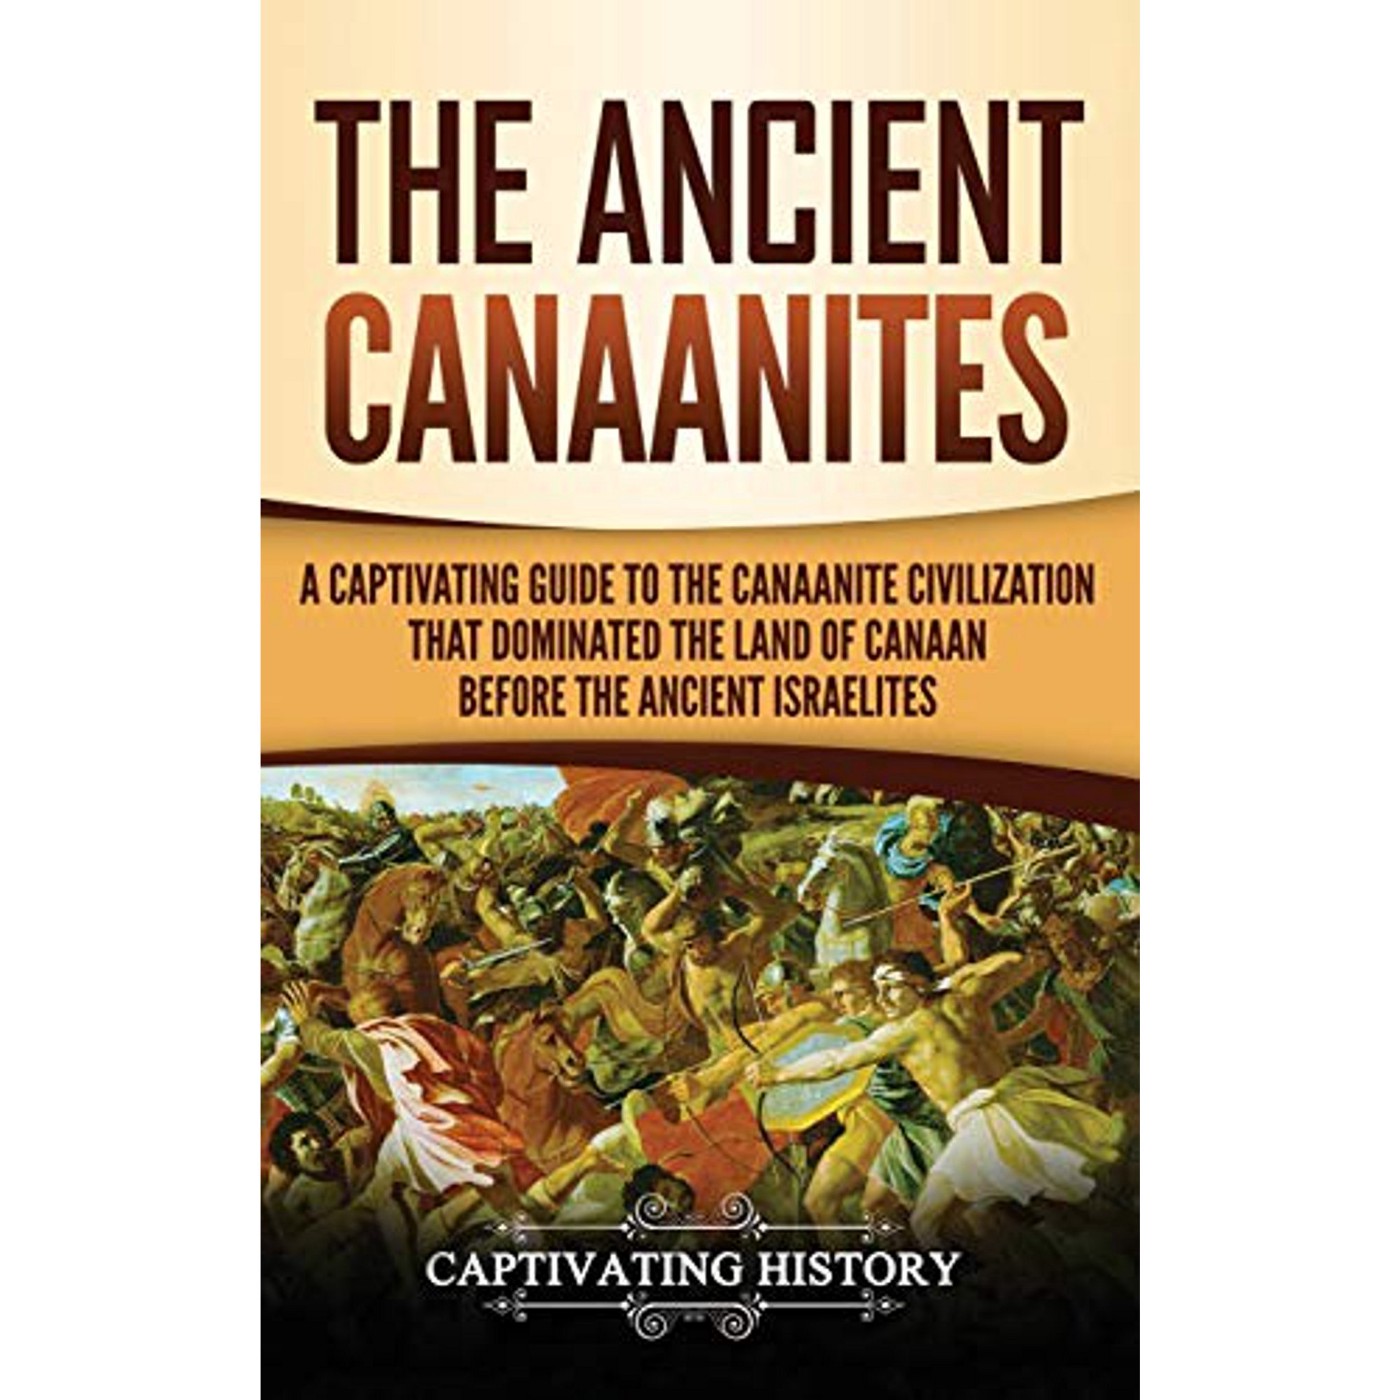 The cover of the book "The Ancient Canaanites: A Captivating Guide to the Canaanite Civilization that Dominated the Land of Canaan before the Ancient Israelites" from the "Captivating History" series. It features an illustration of a very one-sided battle.